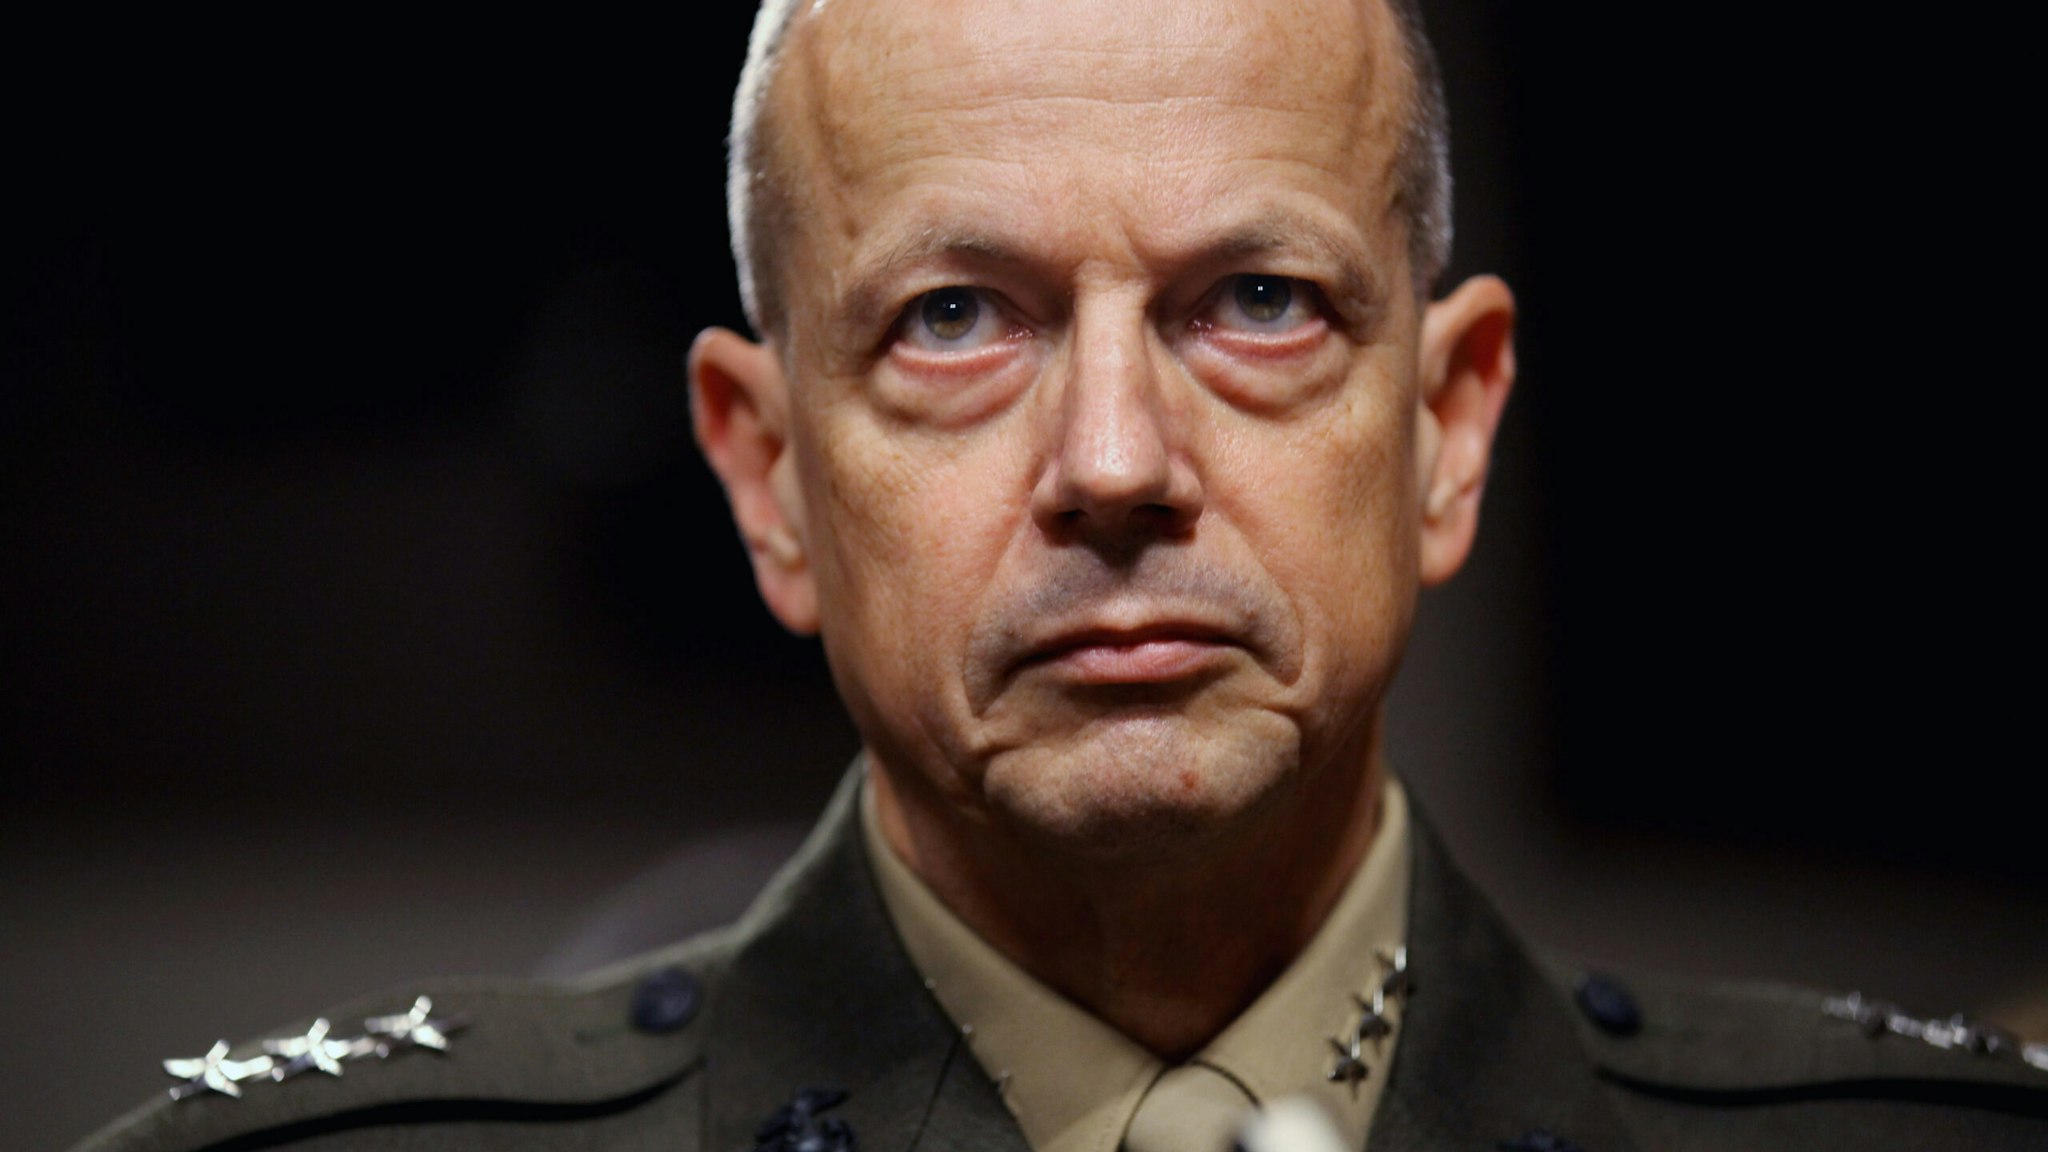 Retired Gen. John Allen resigned from the Brookings Institution amid an investigation into alleged illegal lobbying on behalf of Qatar.